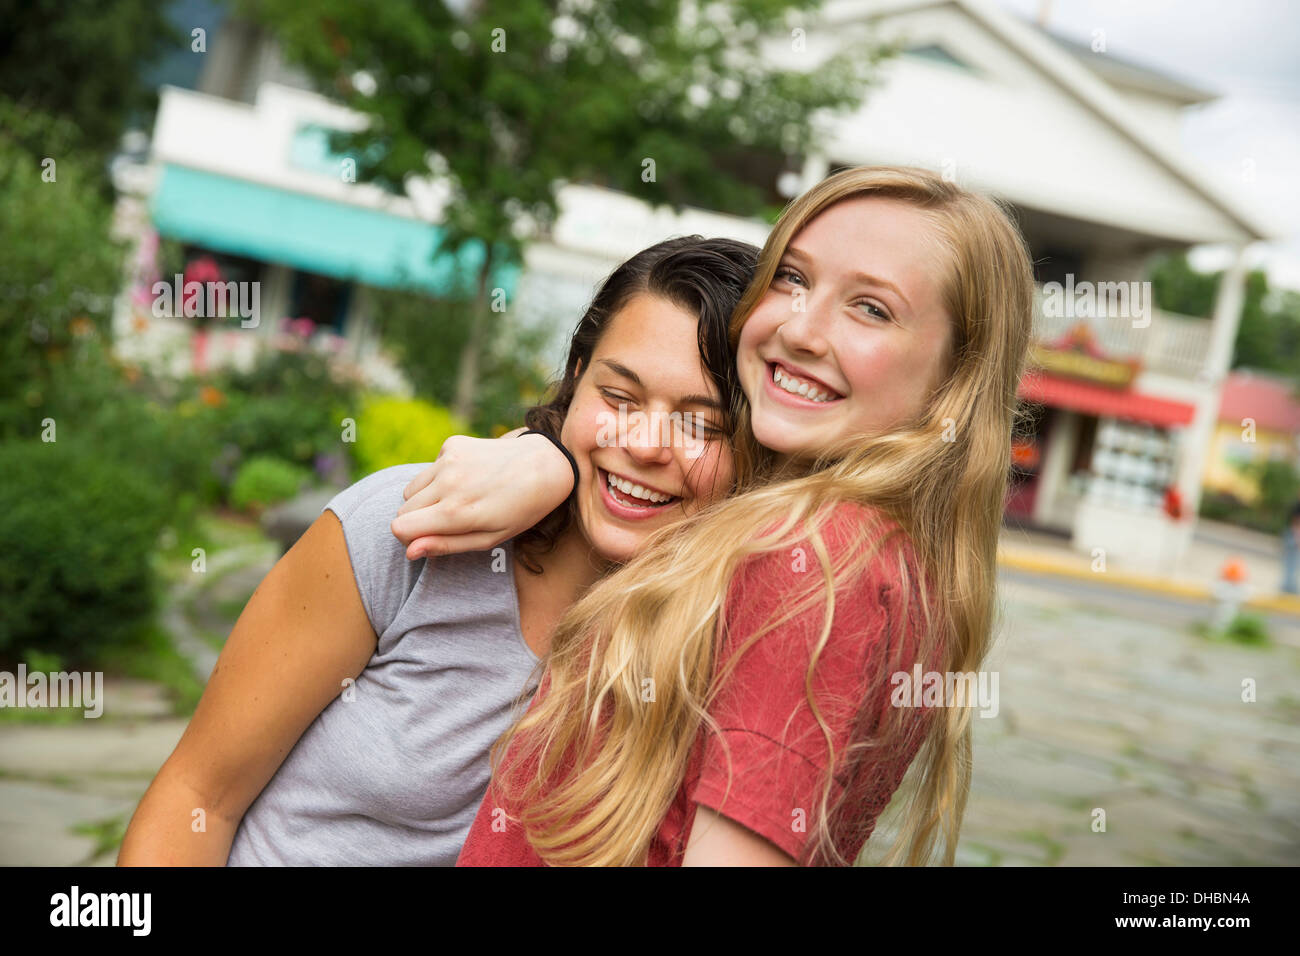 Two girls hugging and laughing. Stock Photo